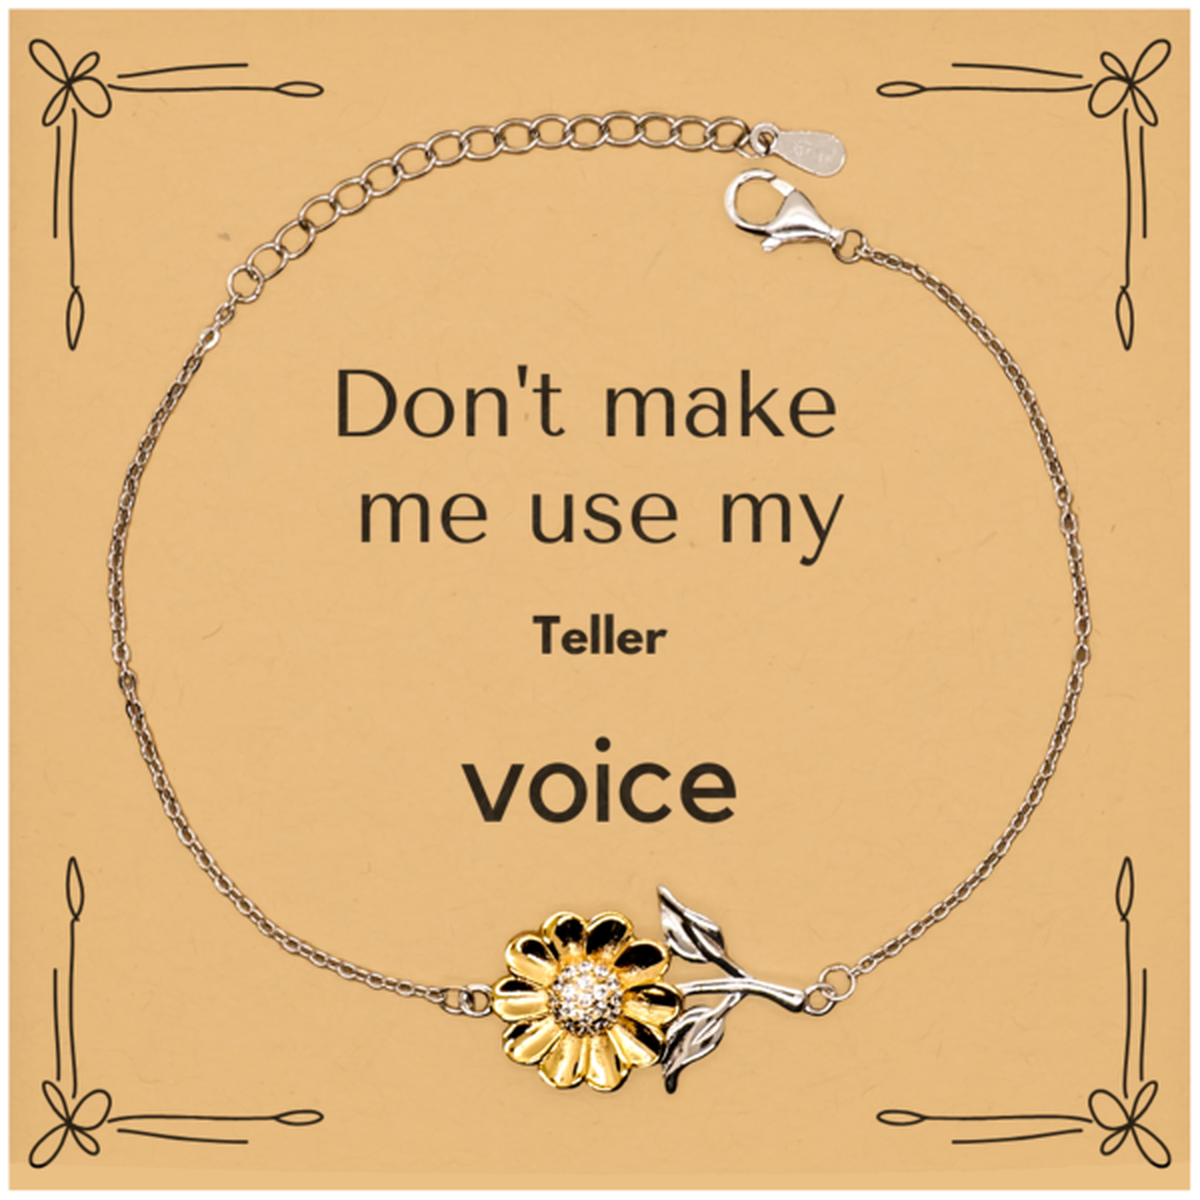 Don't make me use my Teller voice, Sarcasm Teller Card Gifts, Christmas Teller Sunflower Bracelet Birthday Unique Gifts For Teller Coworkers, Men, Women, Colleague, Friends